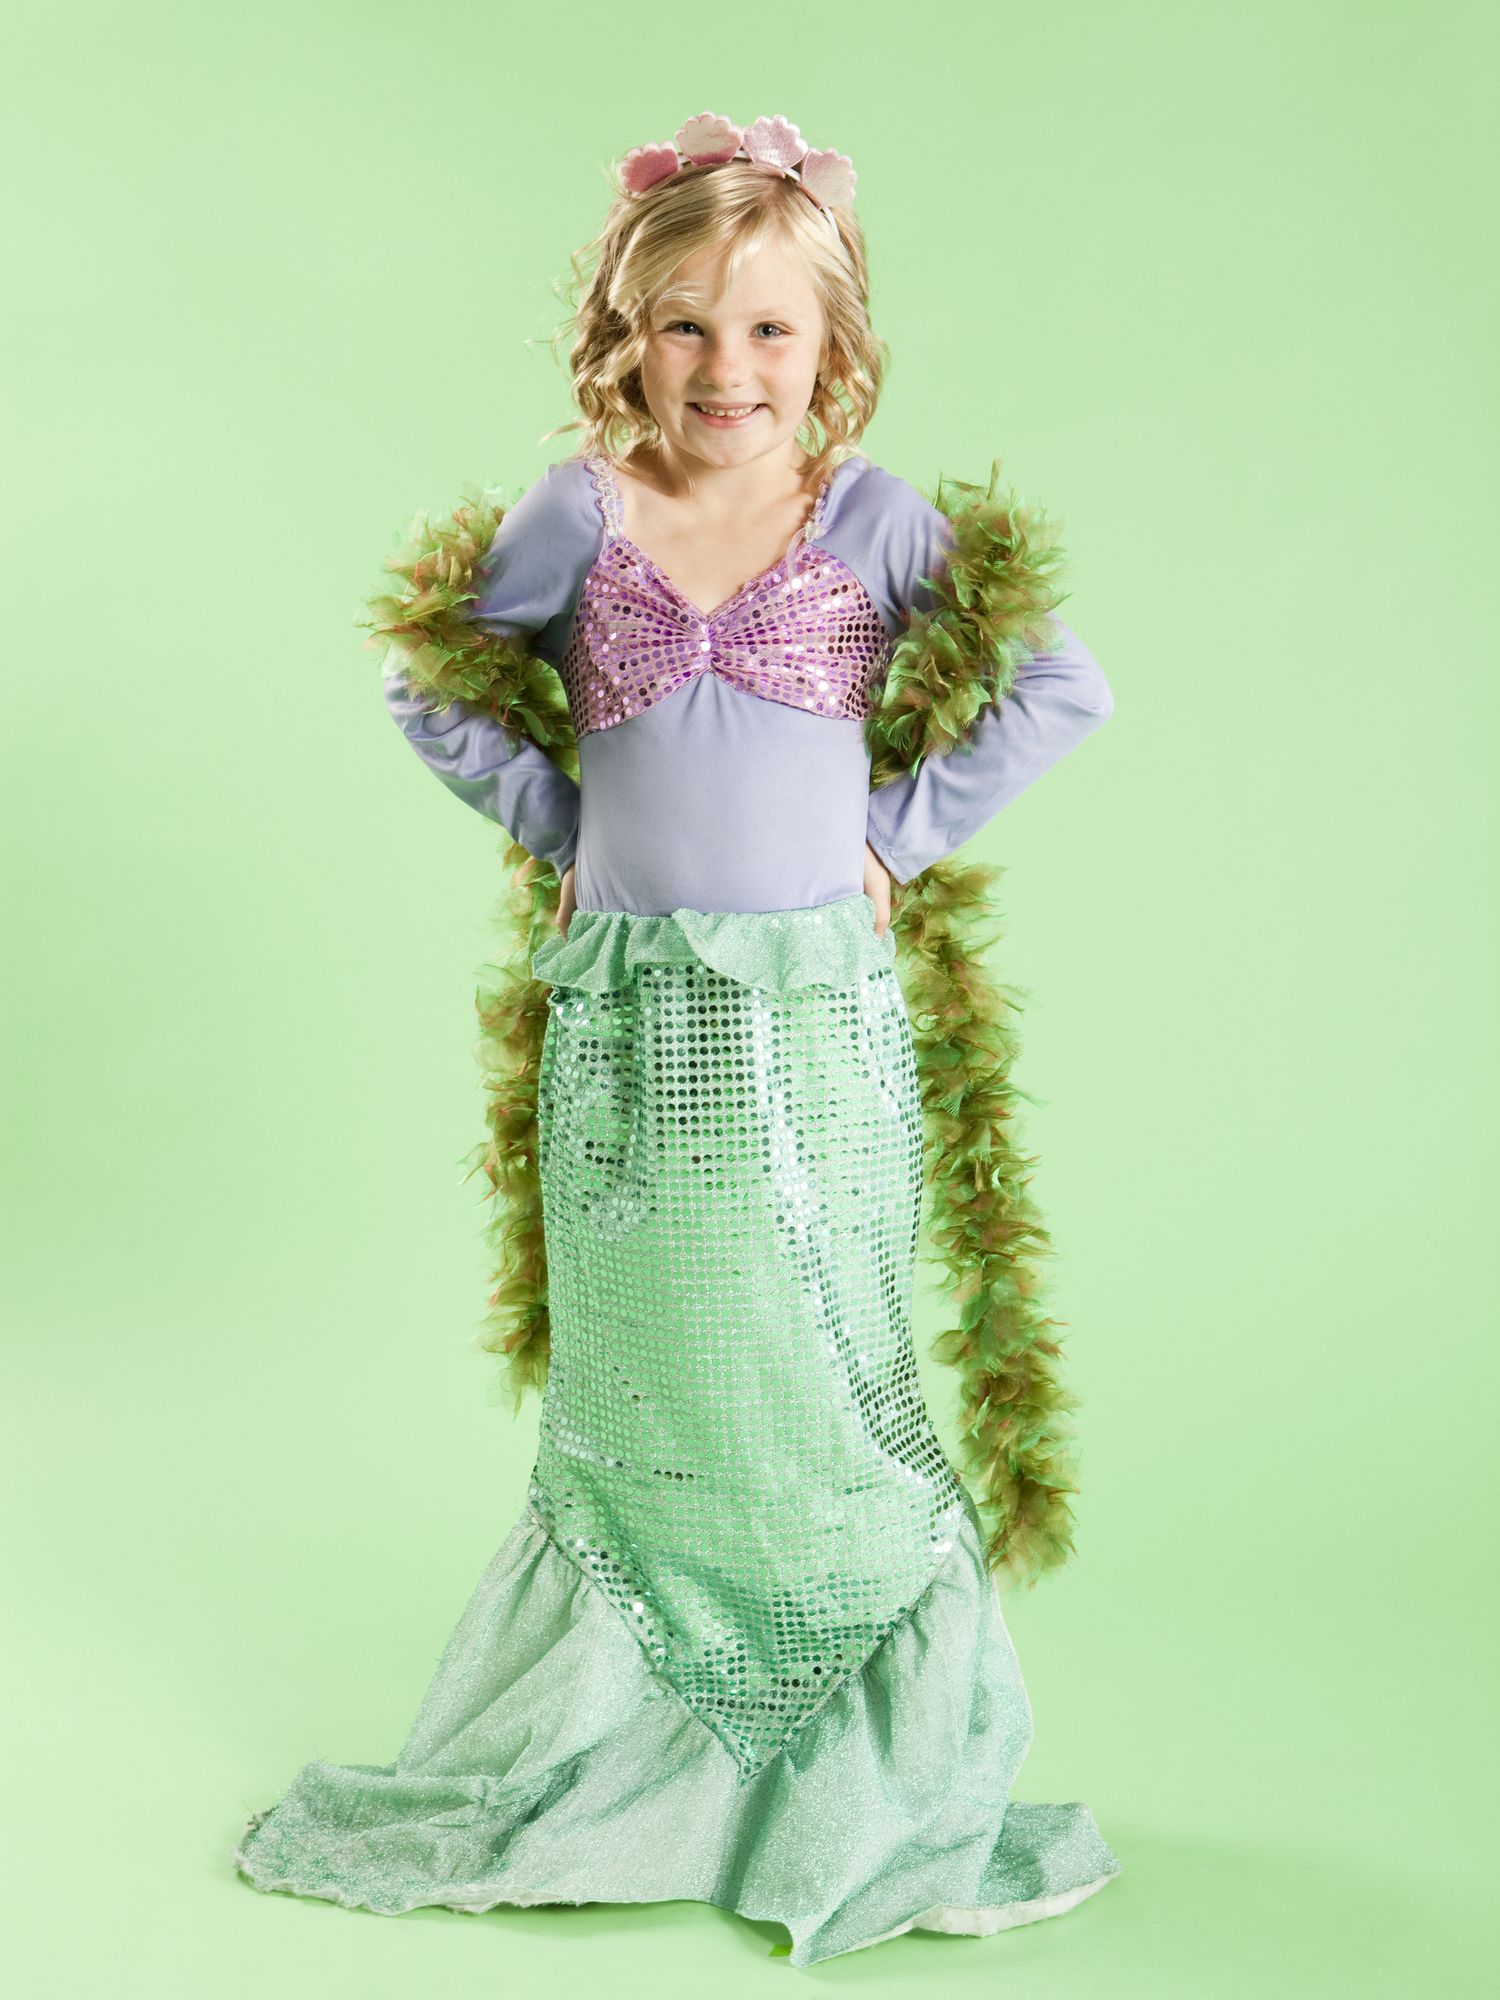 Clothing Boys Clothing Costumes Mermaid Tail Baby Girl Outfit Mermaid Costume for Toddlers 1st Birthday Dress halloween costume 